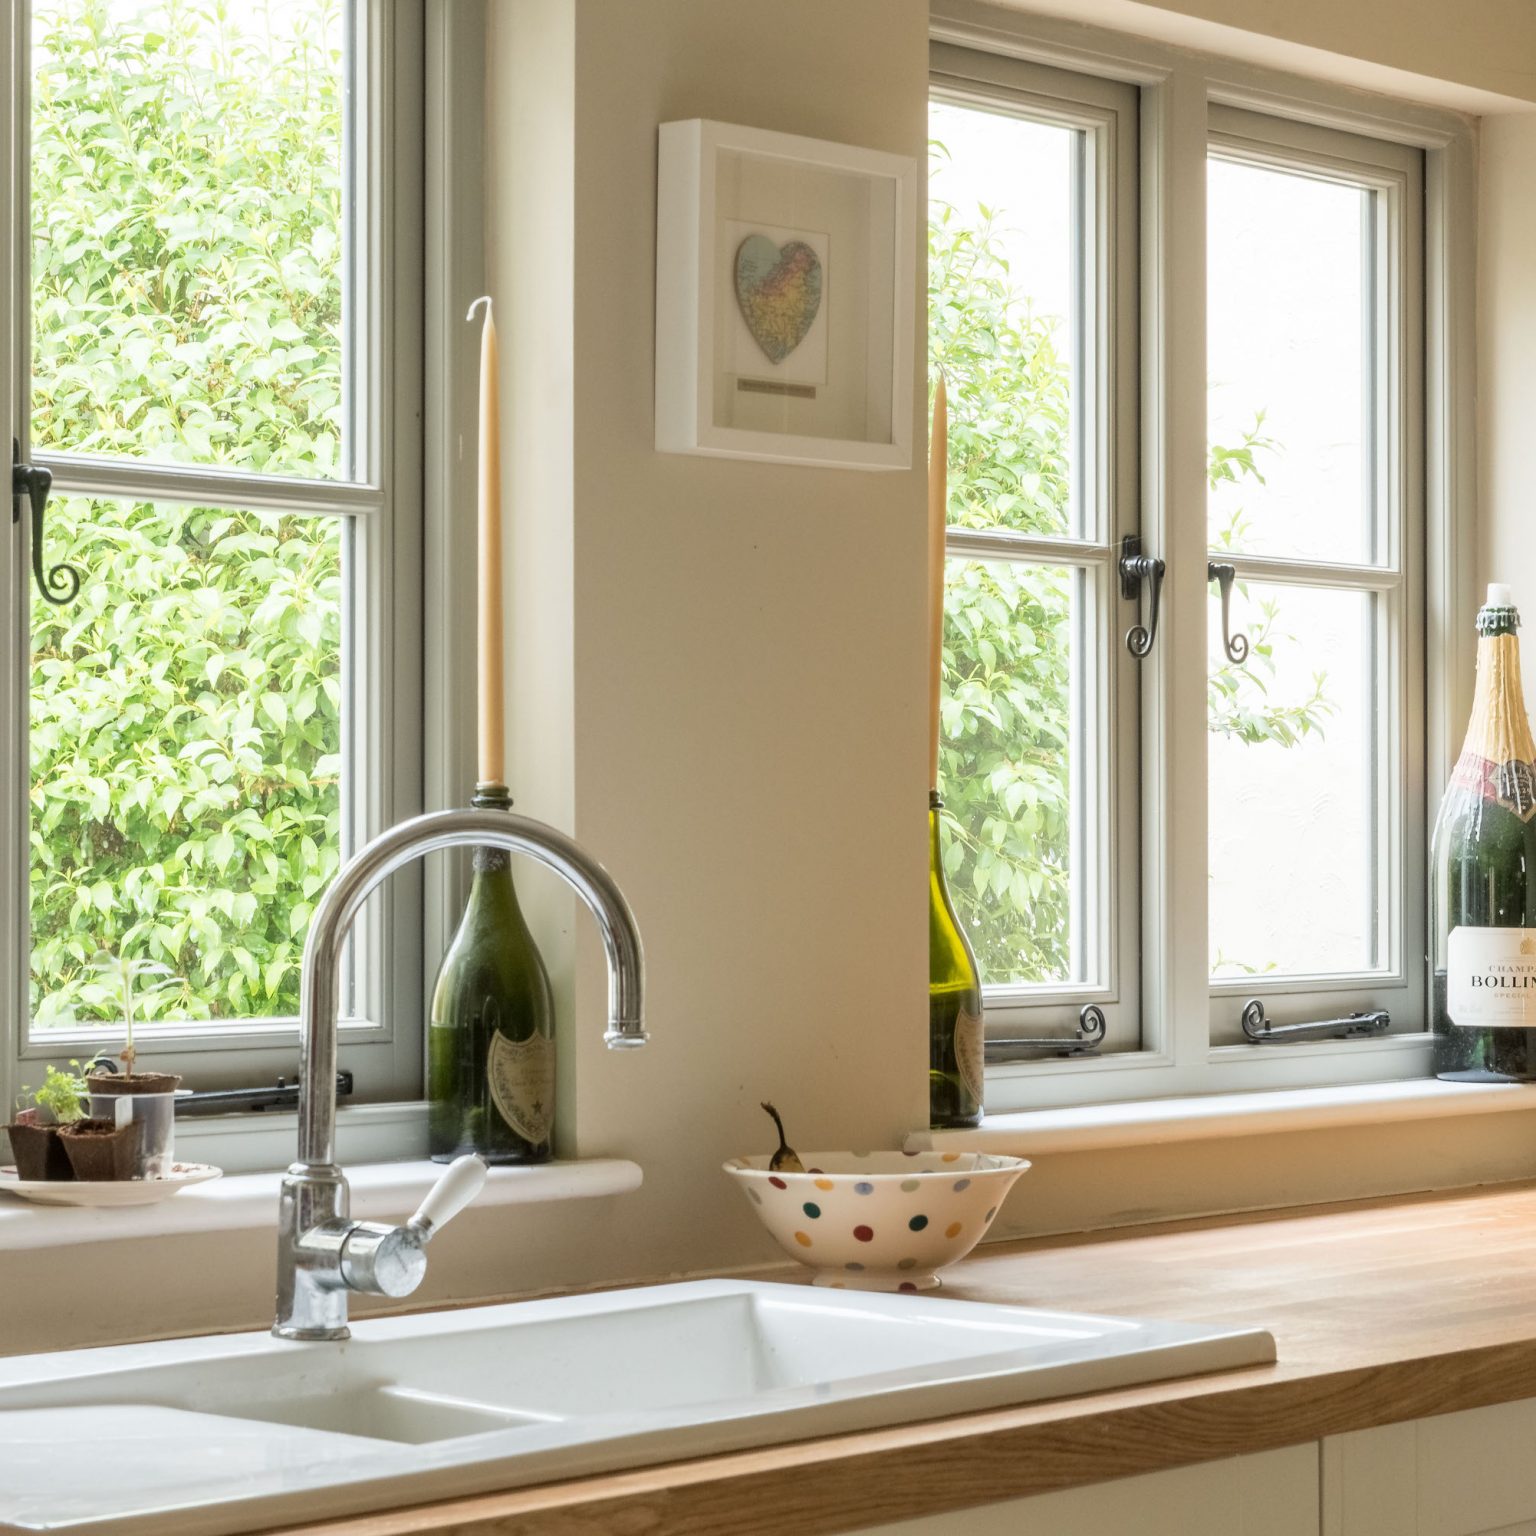 timber casement windows in a country kitchen